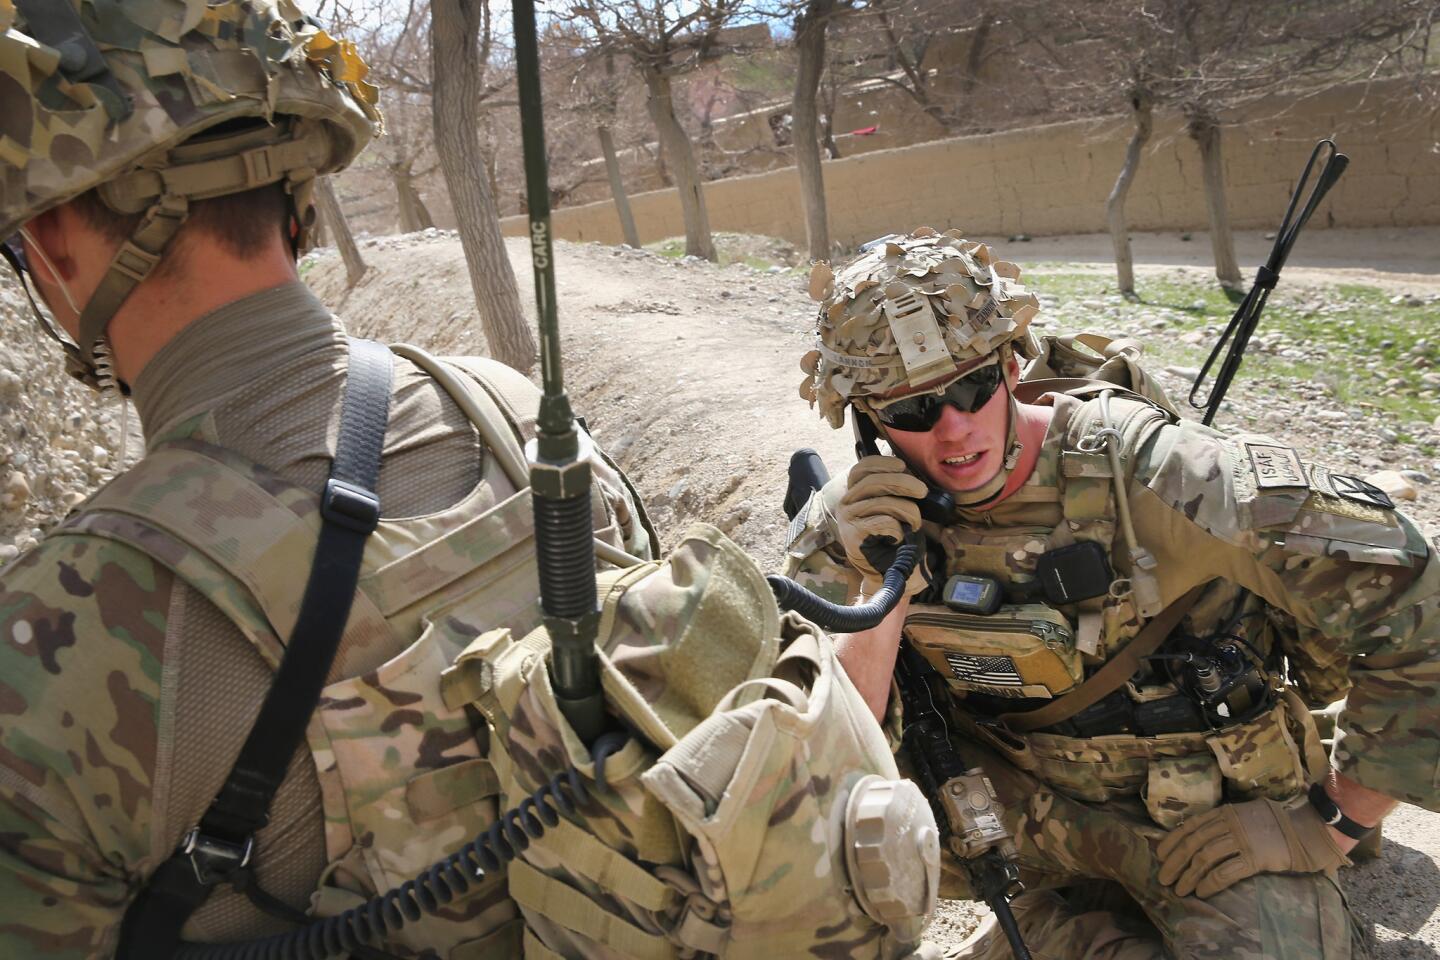 The CIA is planning to close its satellite bases in Afghanistan and pull all its personnel back to Kabul by early summer. The U.S. military says it needs the intelligence the CIA provides. Above, Army 1st Lt. Eric Cannon speaks by radio on patrol near a village south of Kabul.